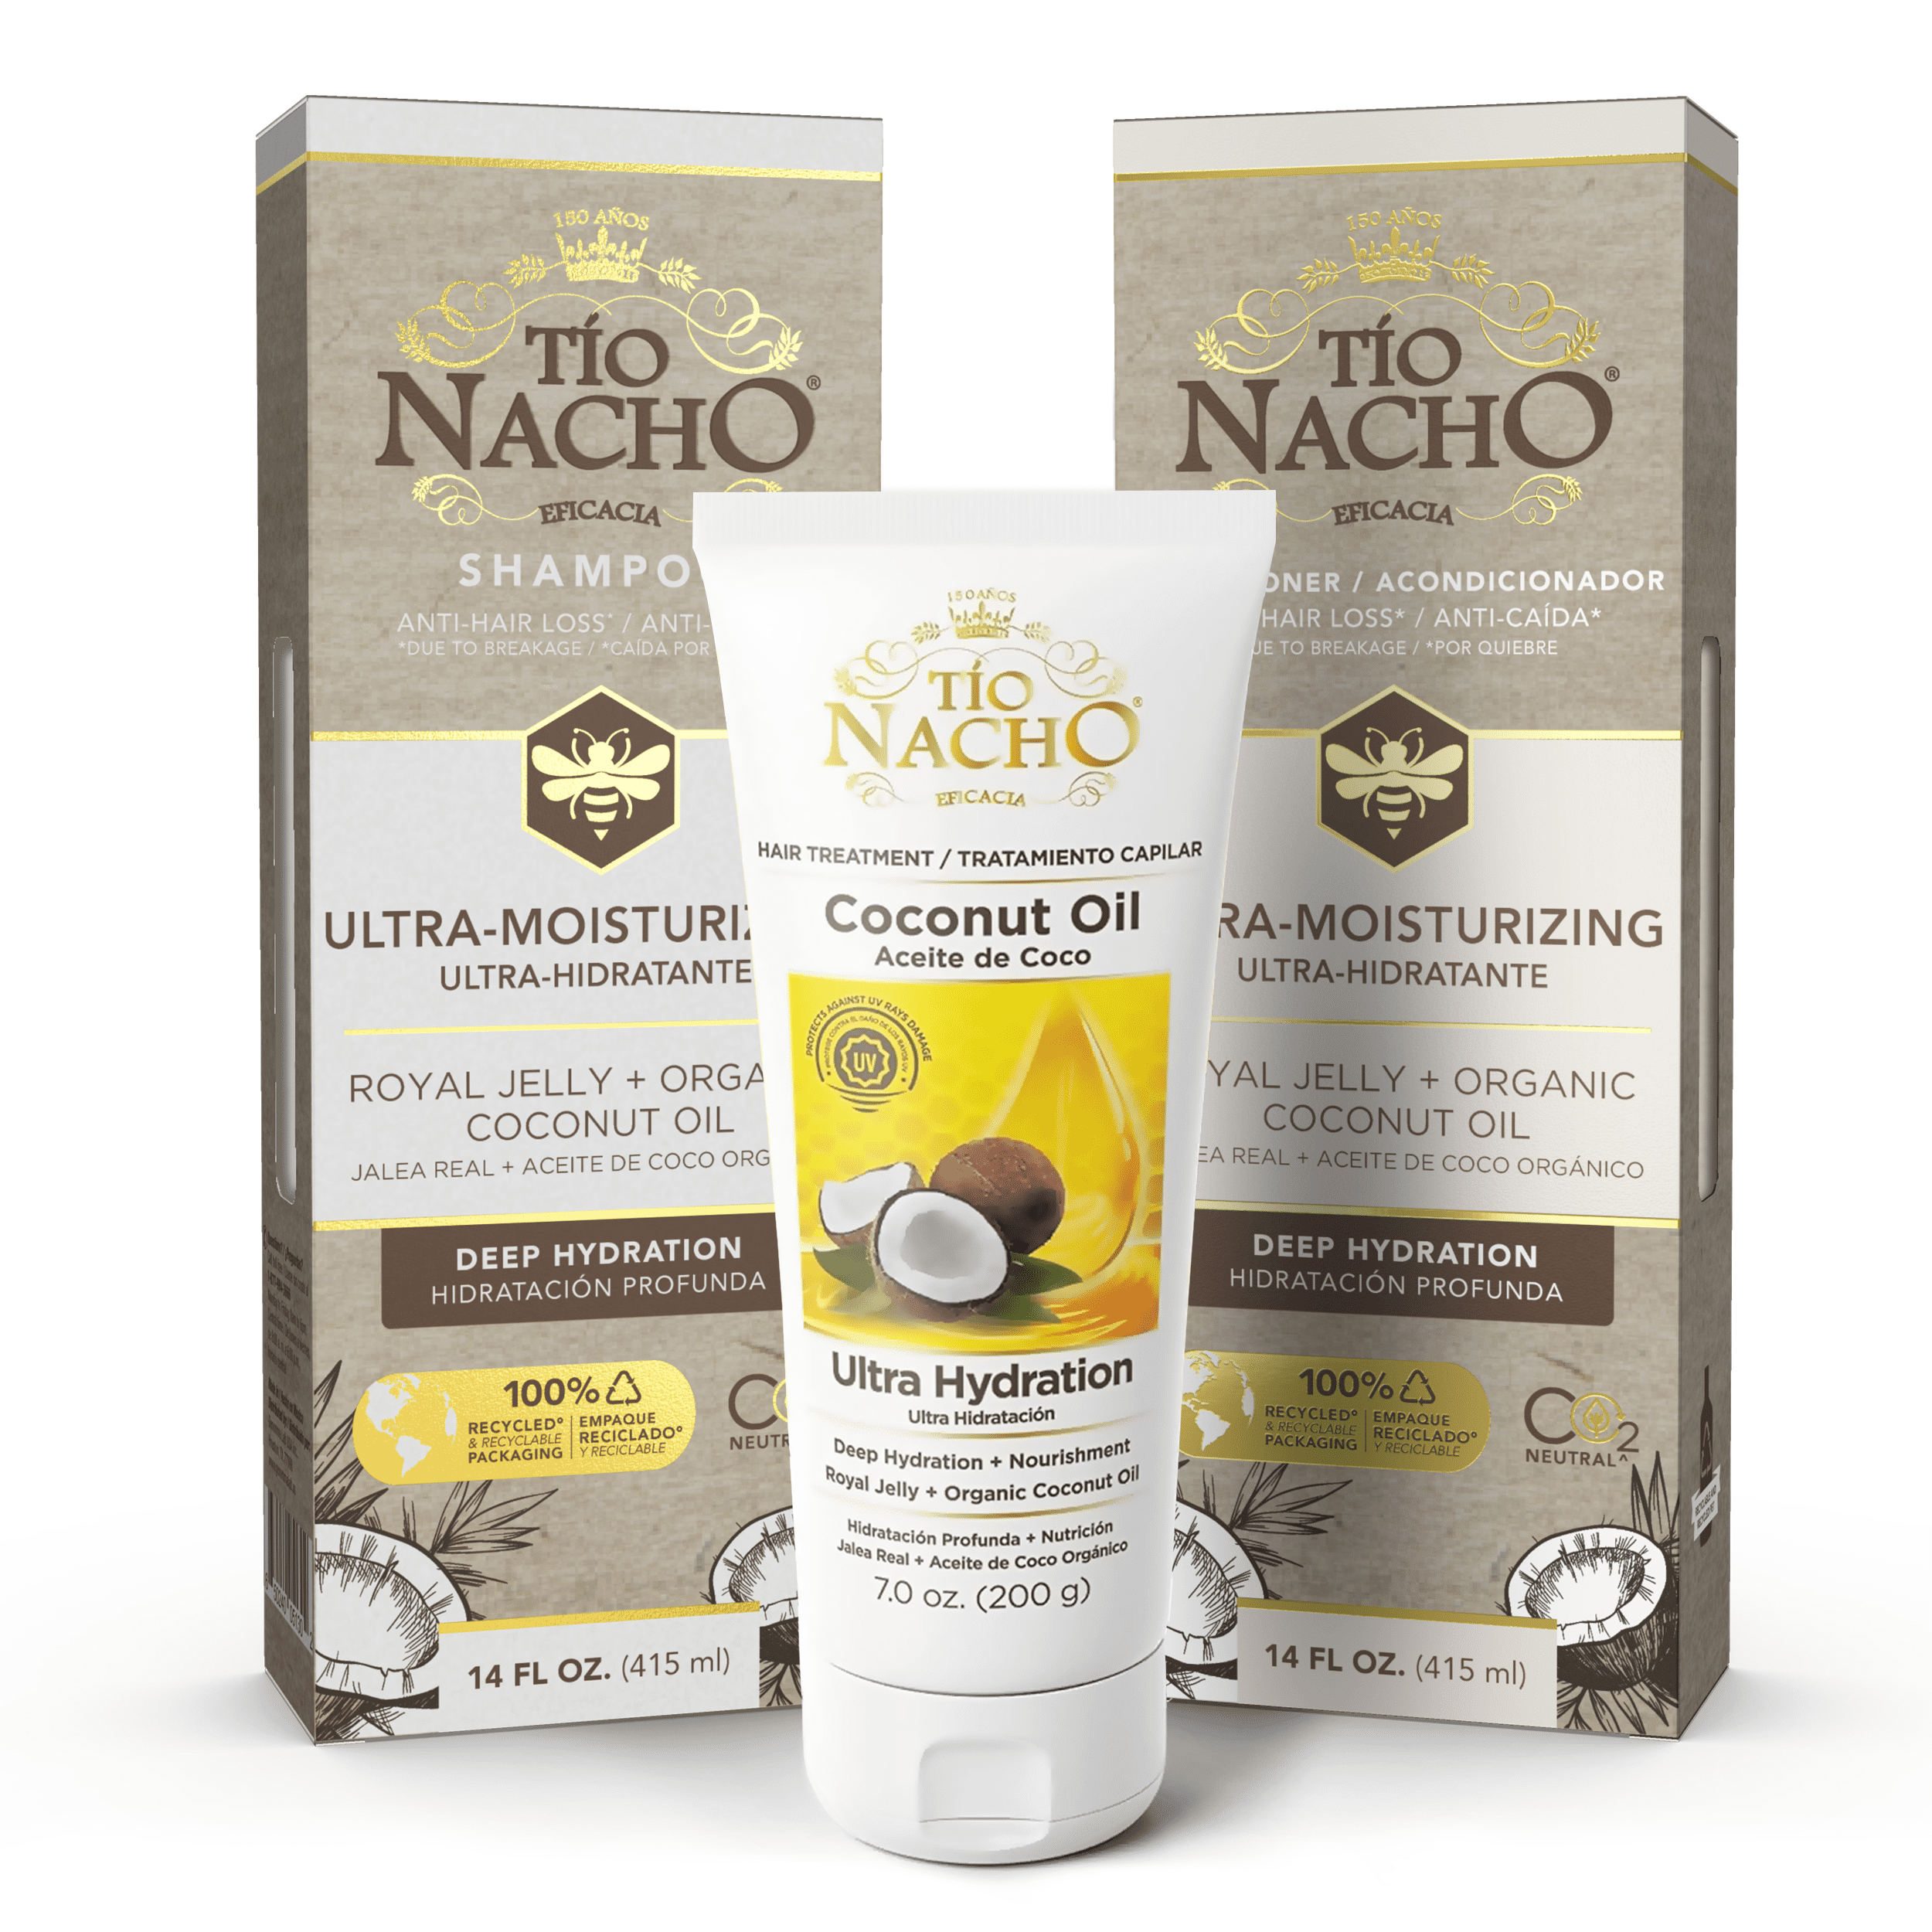 3 Tio Shampoo, Coconut Bundle: and Treatment of Oil Value Pack Conditioner Nacho -